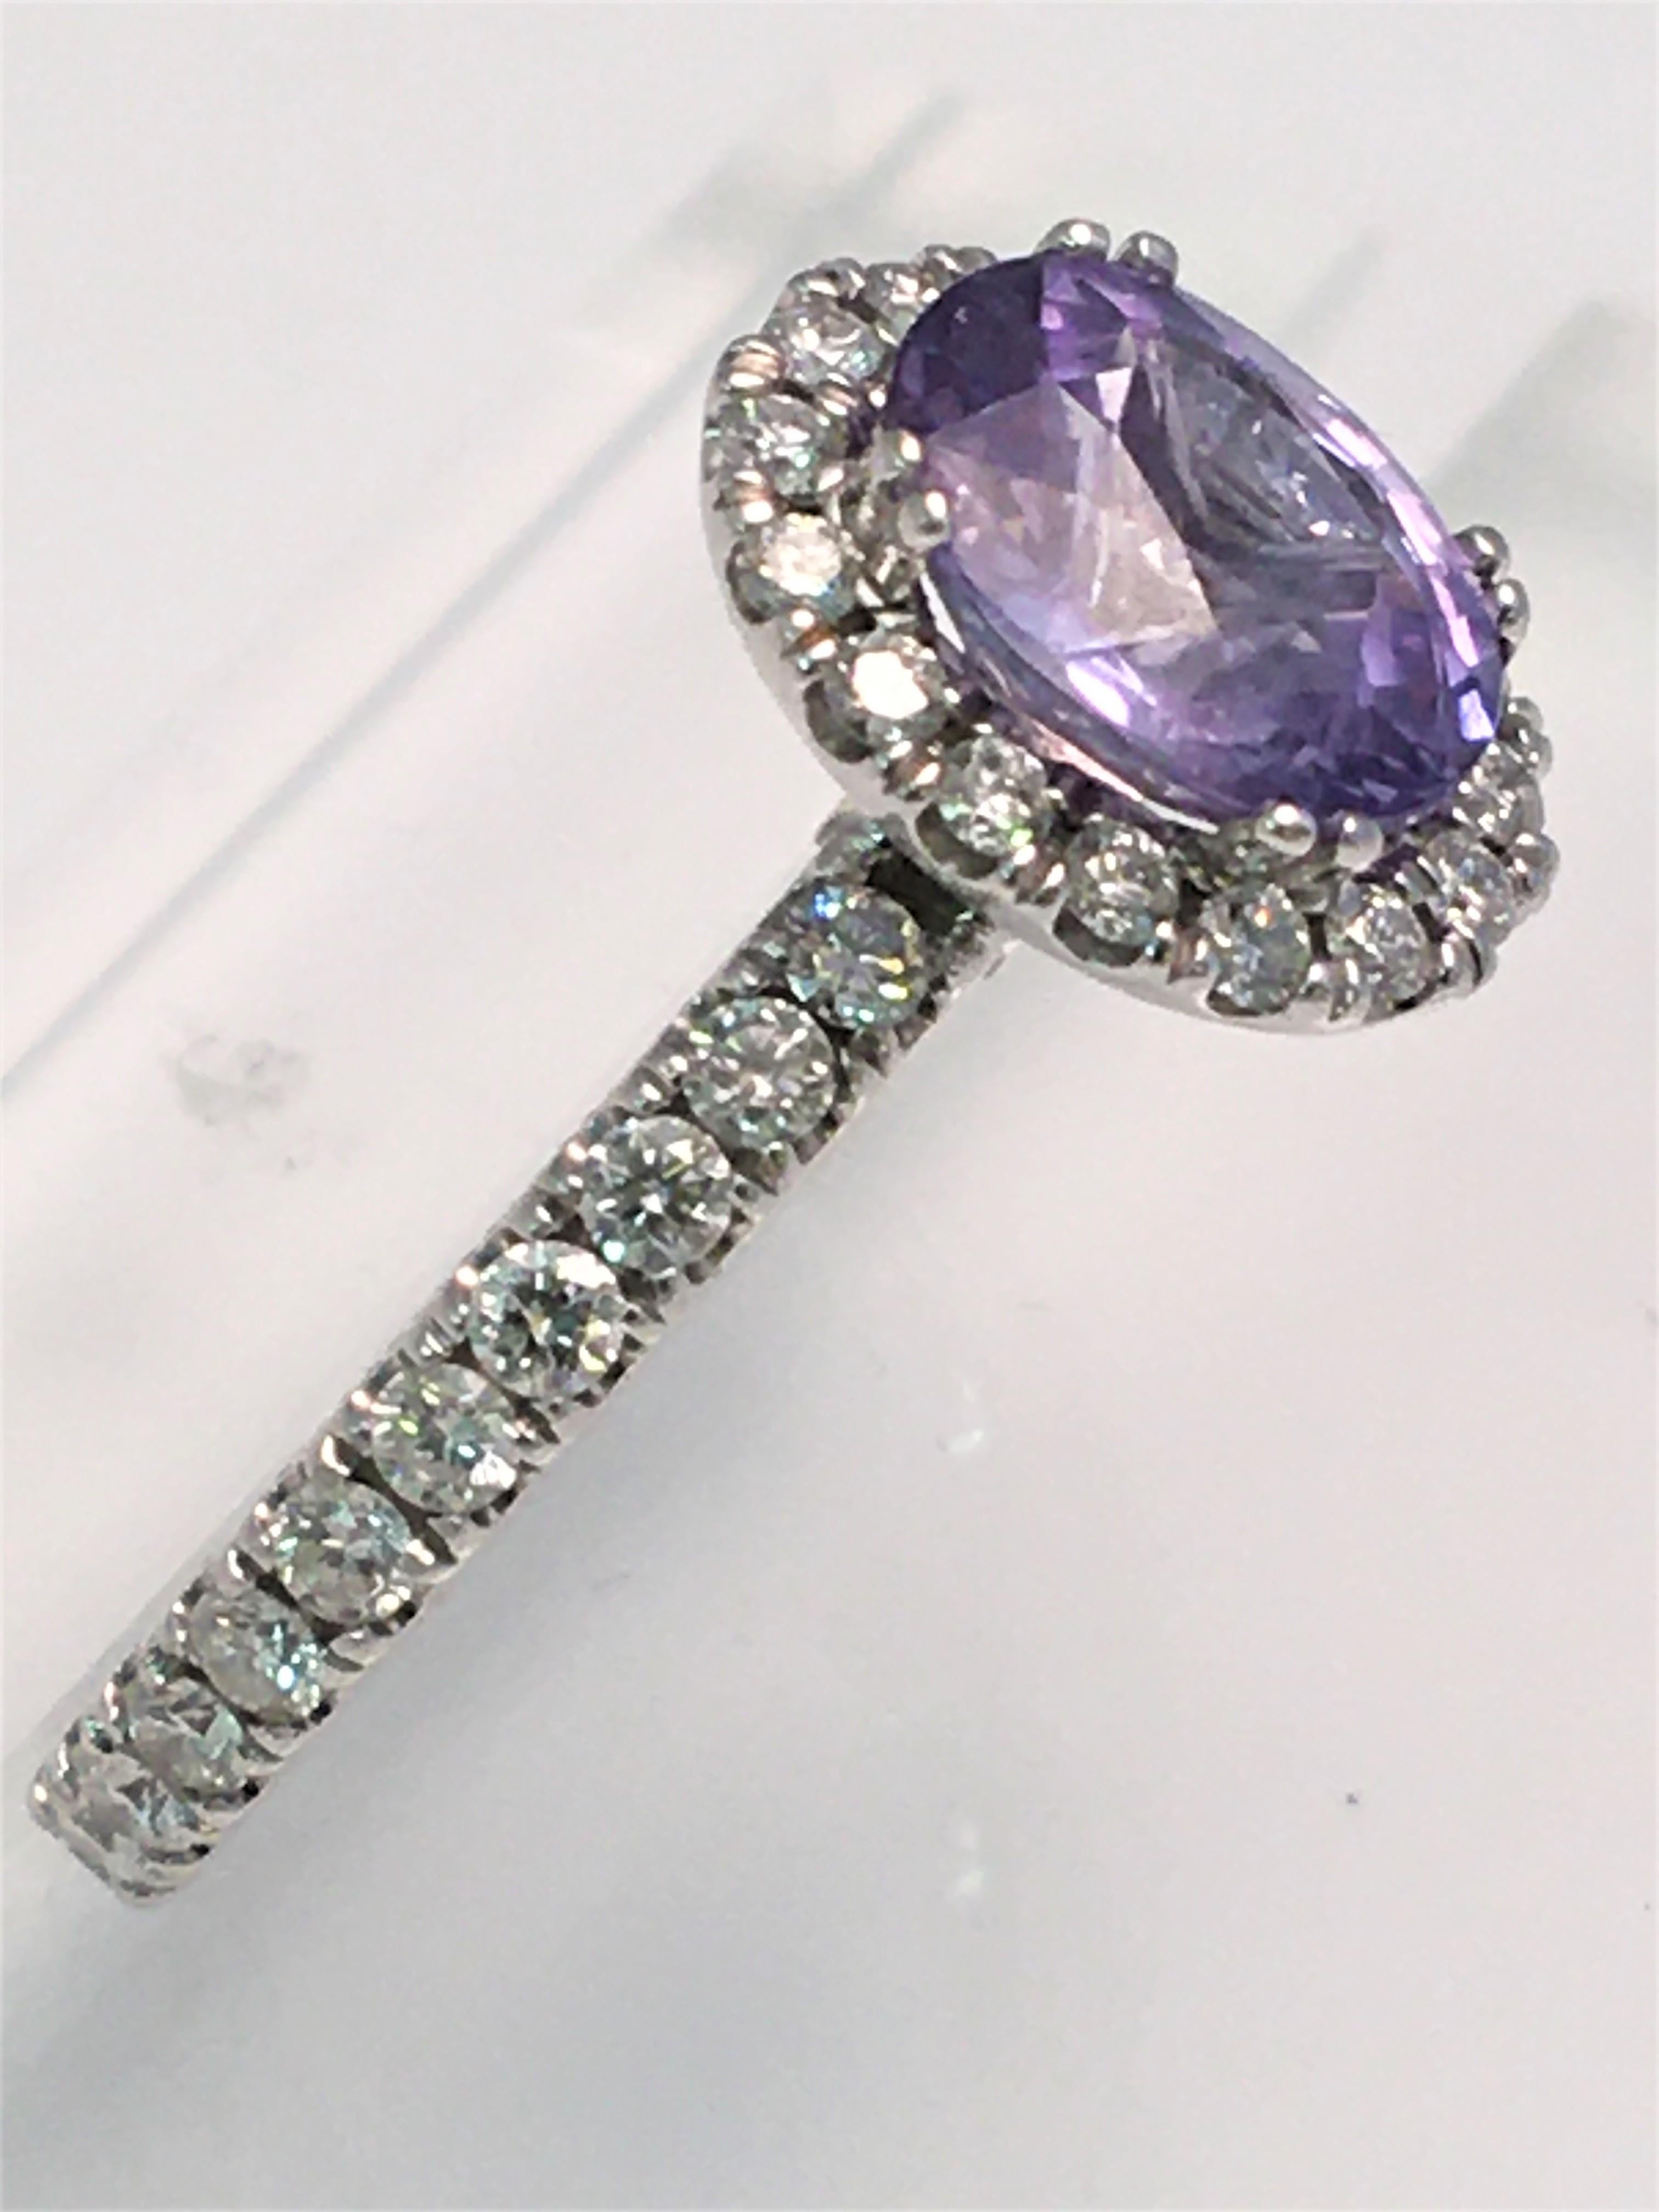 By designer Verragio, a beautiful purple sapphire and diamond ring that will undoubtedly light up a room!!
Approximately 8 X 7mm oval purple sapphire surrounded by round diamonds
Round diamonds also go about 85% of the way around the band
2 round